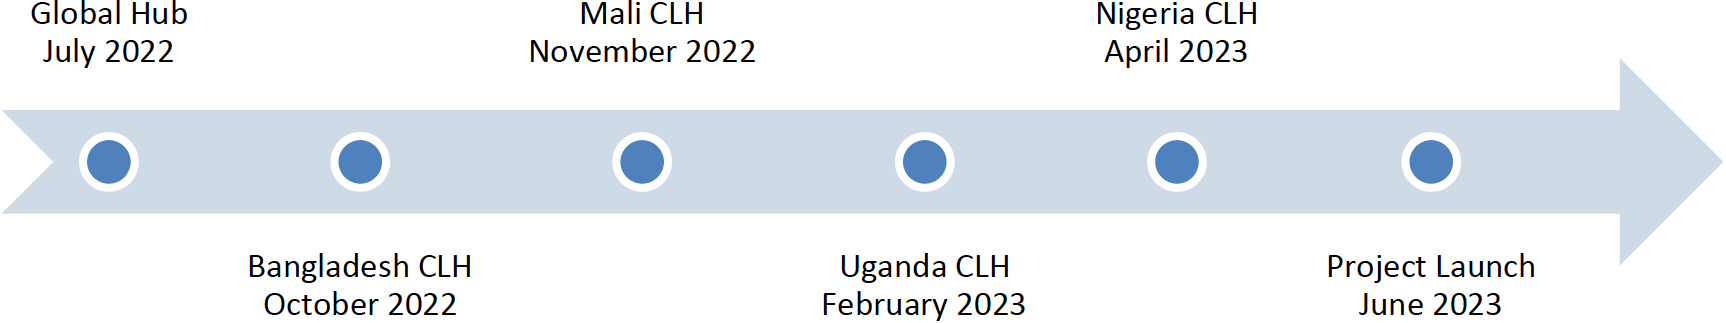 Figure 1. Timeline of Global and CLH Awards